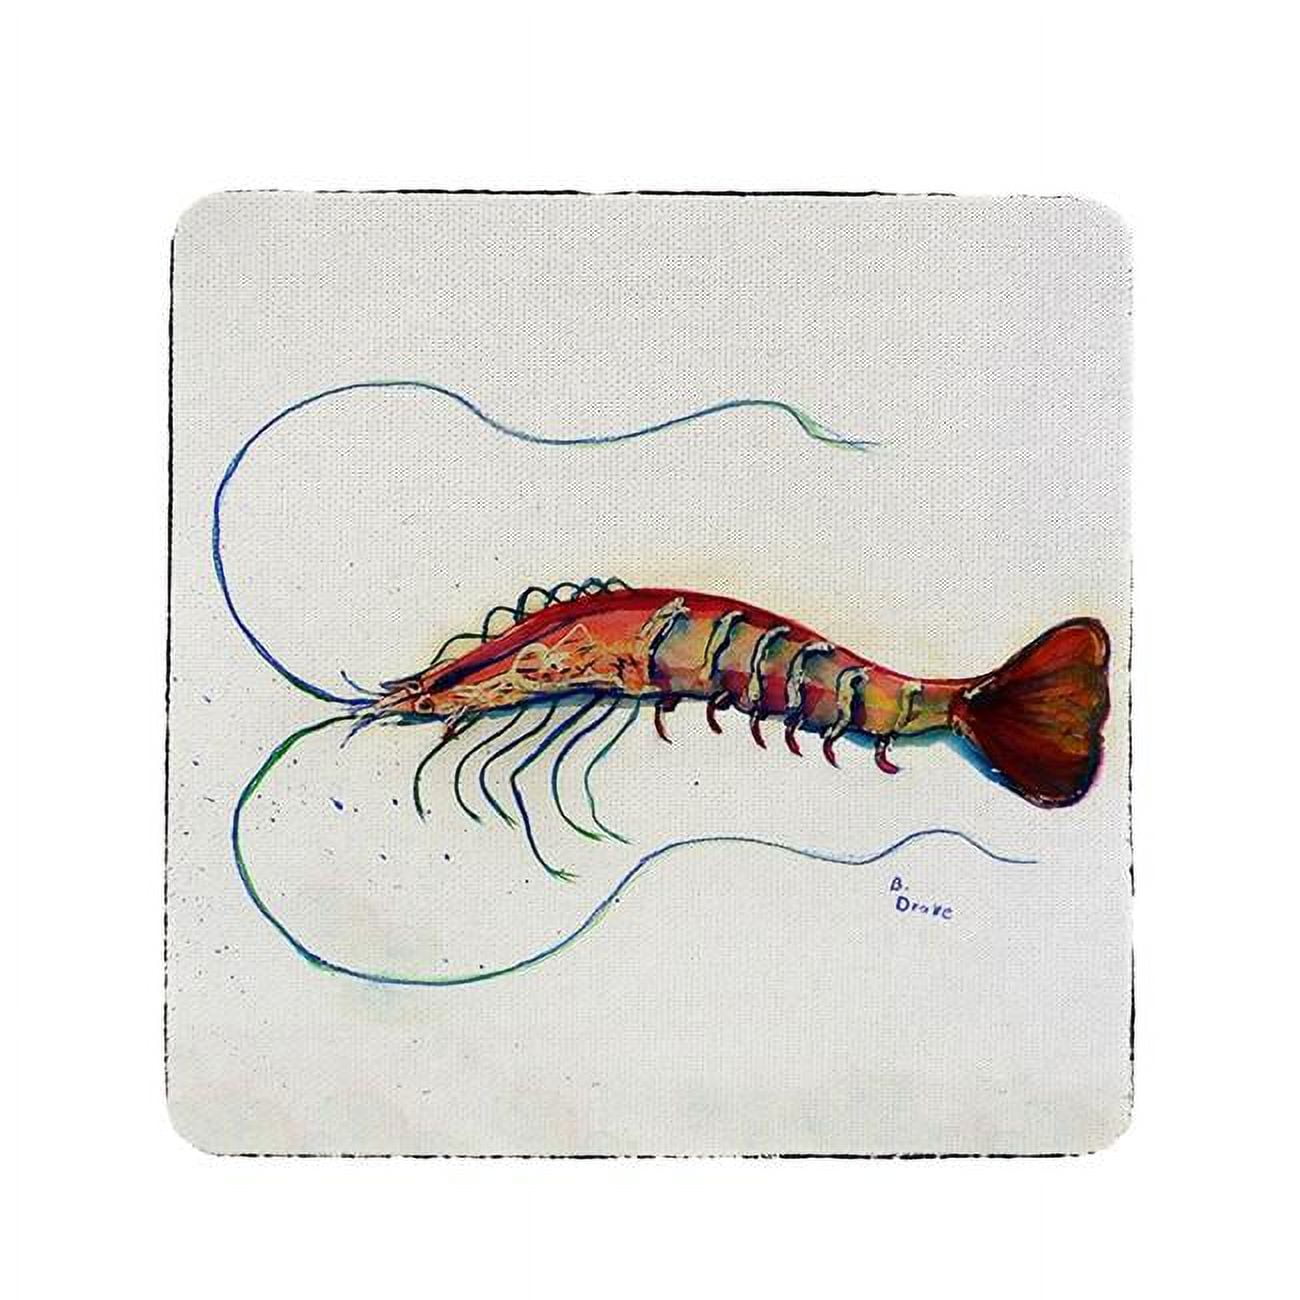 Ct395 4 X 4 In. Betsys Shrimp Coaster - Set Of 4